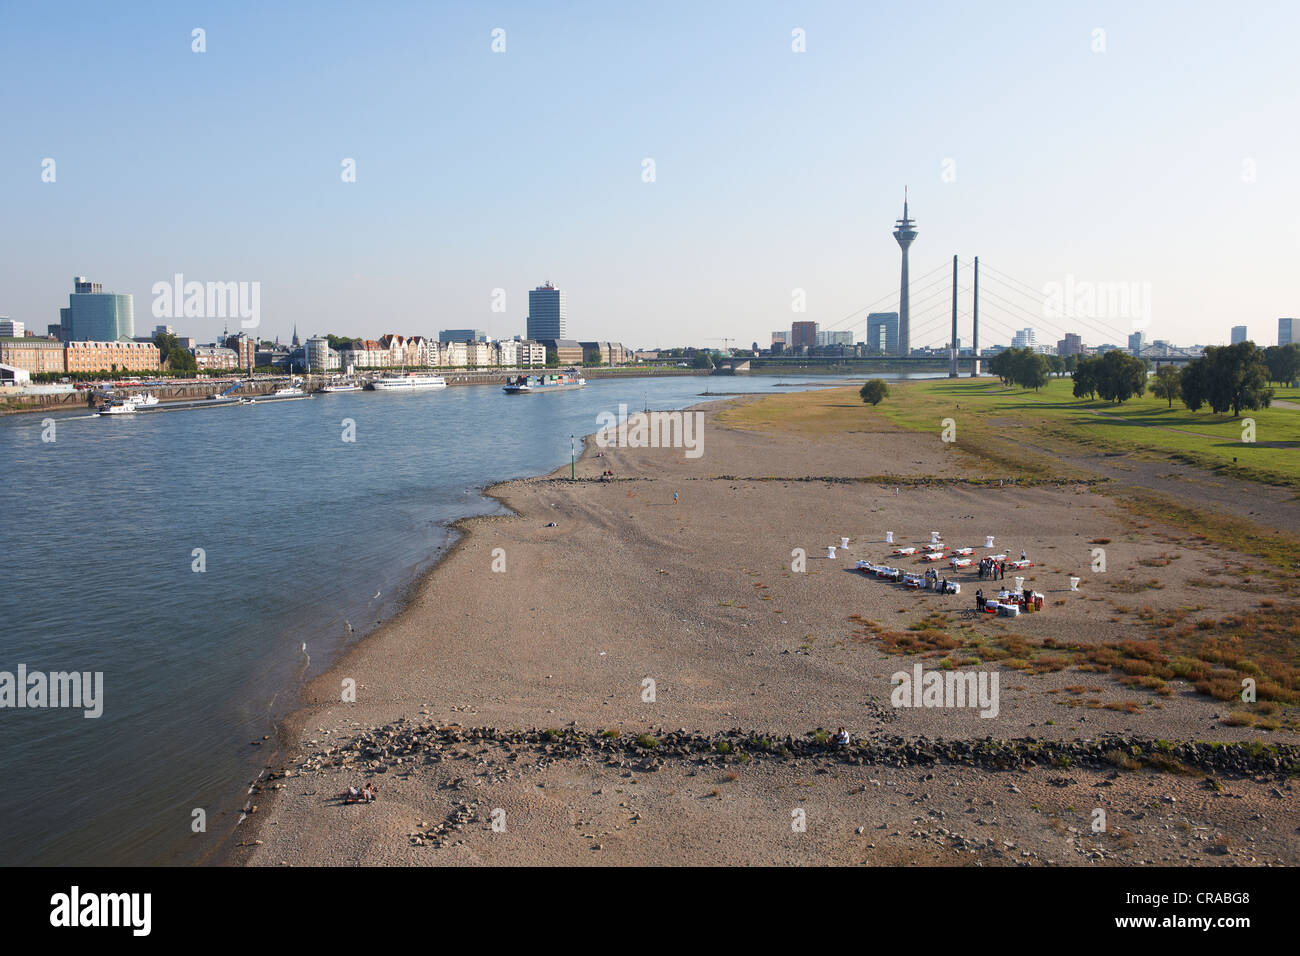 Business reception, meeting on the bank of the Rhine River in Duesseldorf, North Rhine-Westphalia, Germany, Europe Stock Photo